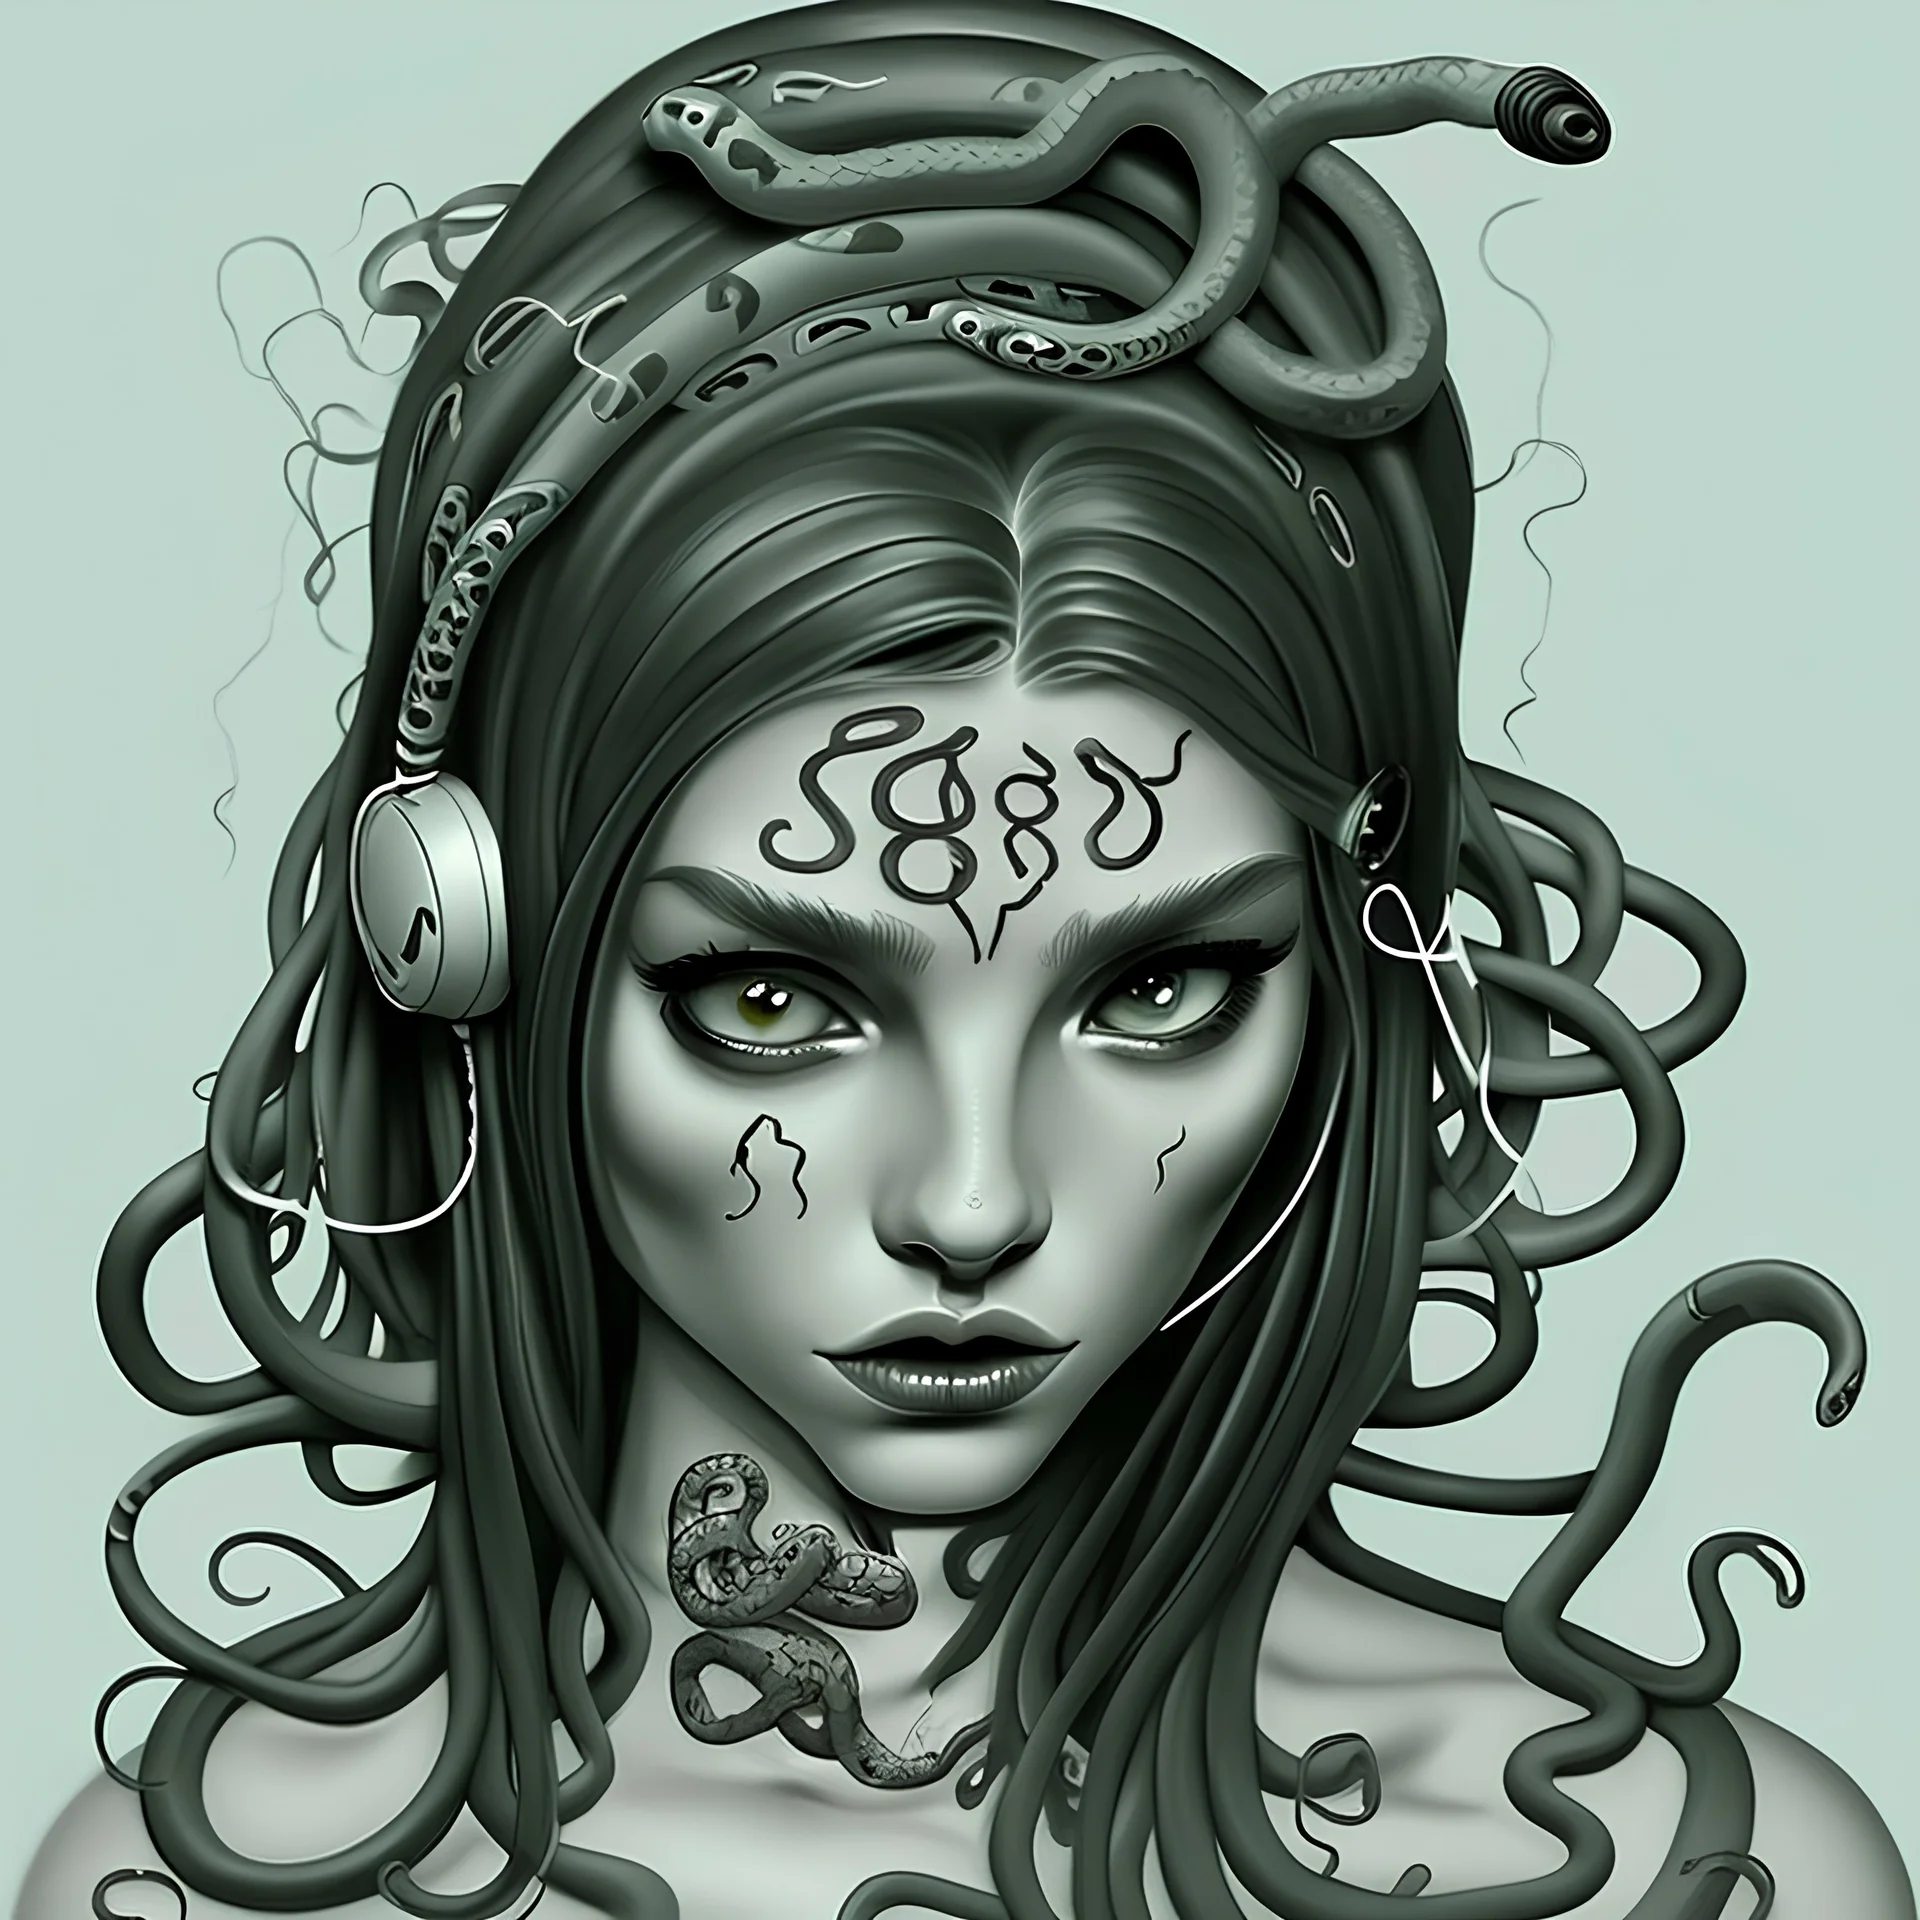 Medusa woman with headphones and tattoos and snakes on his head